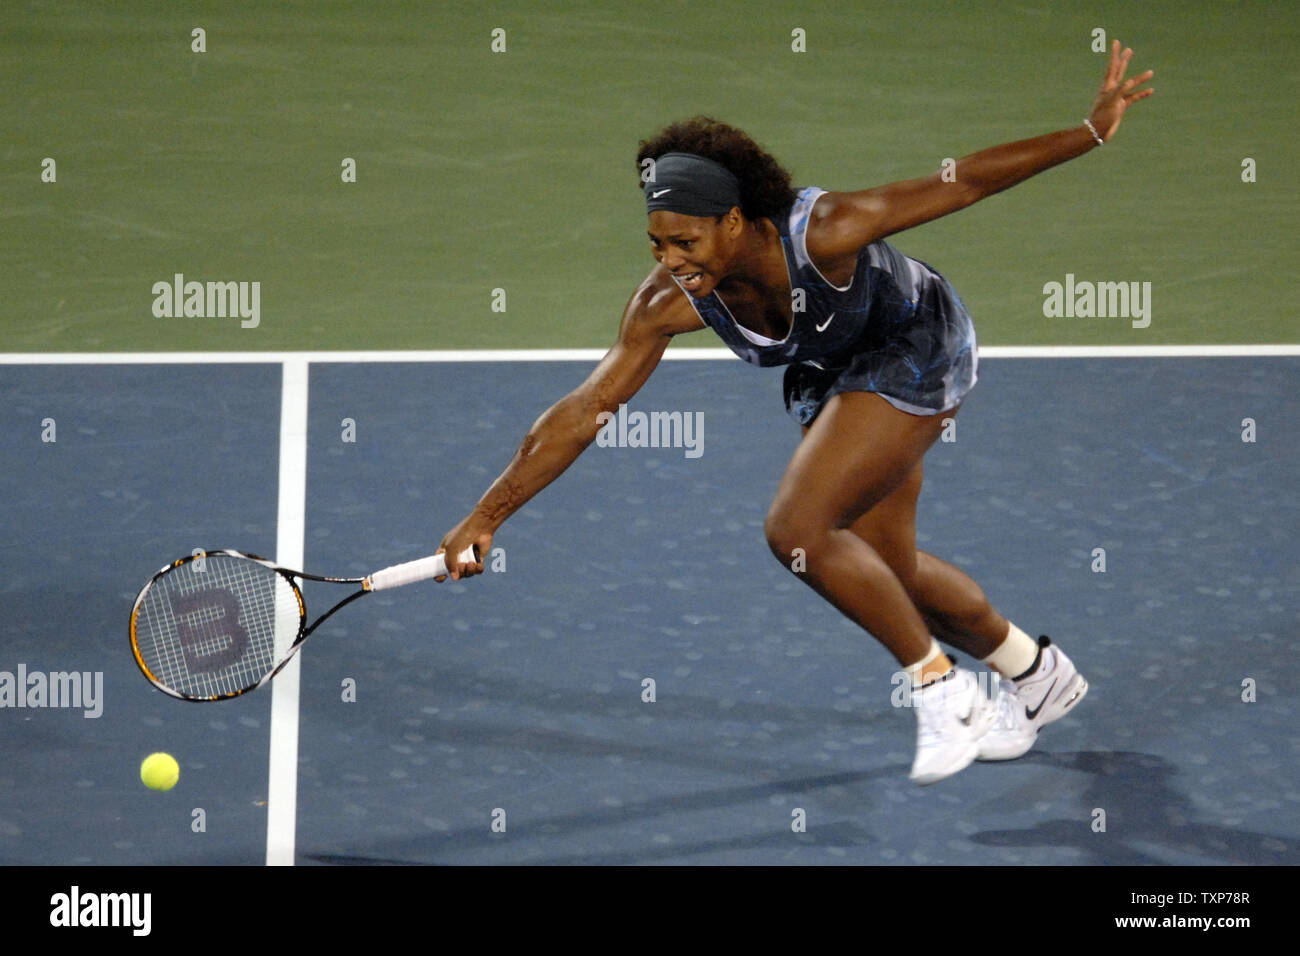 The world No. 1, Serena Williams from the United States returns the ball from her opponent Jie Zheng, the world No. 20, from China on the fourth day of the Women's Dubai Championships,  Wednesday February 18, 2009.  Williams won the match 6-4, 6-2. (UPI Photo/Norbert Schiller) Stock Photo